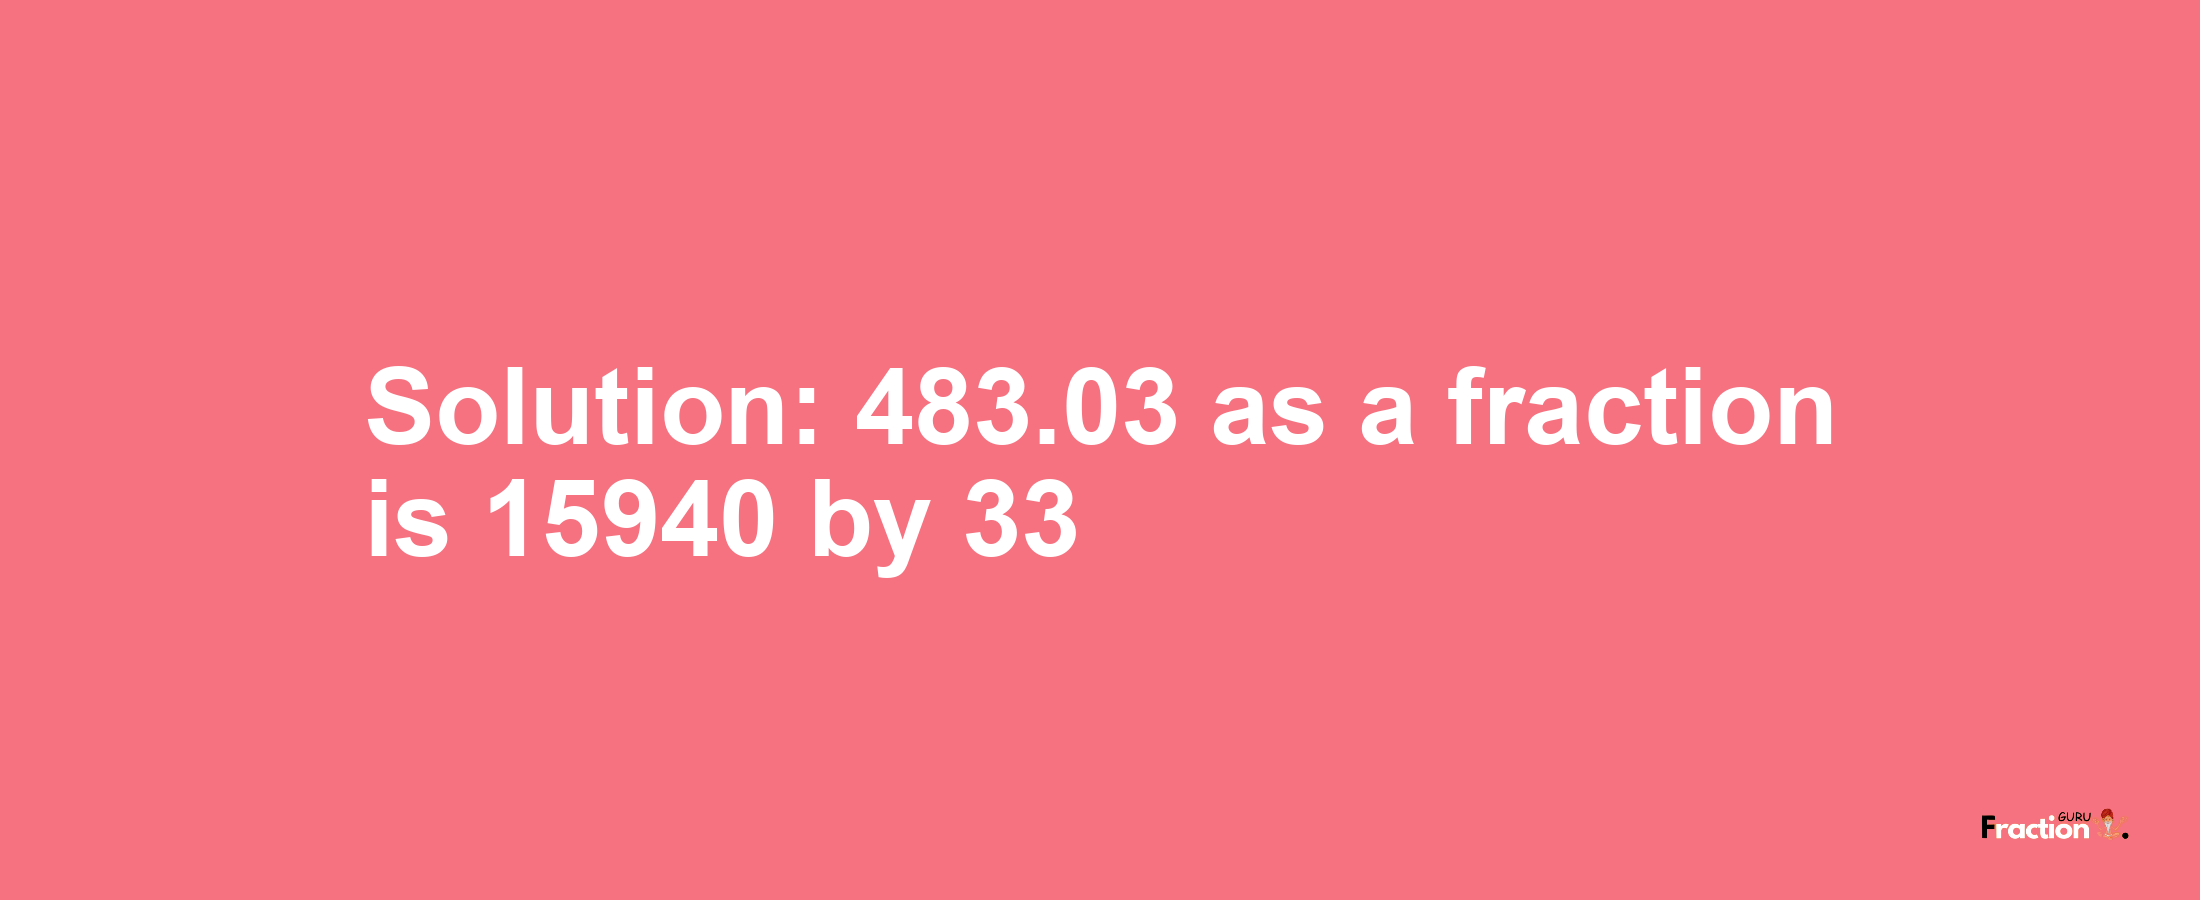 Solution:483.03 as a fraction is 15940/33